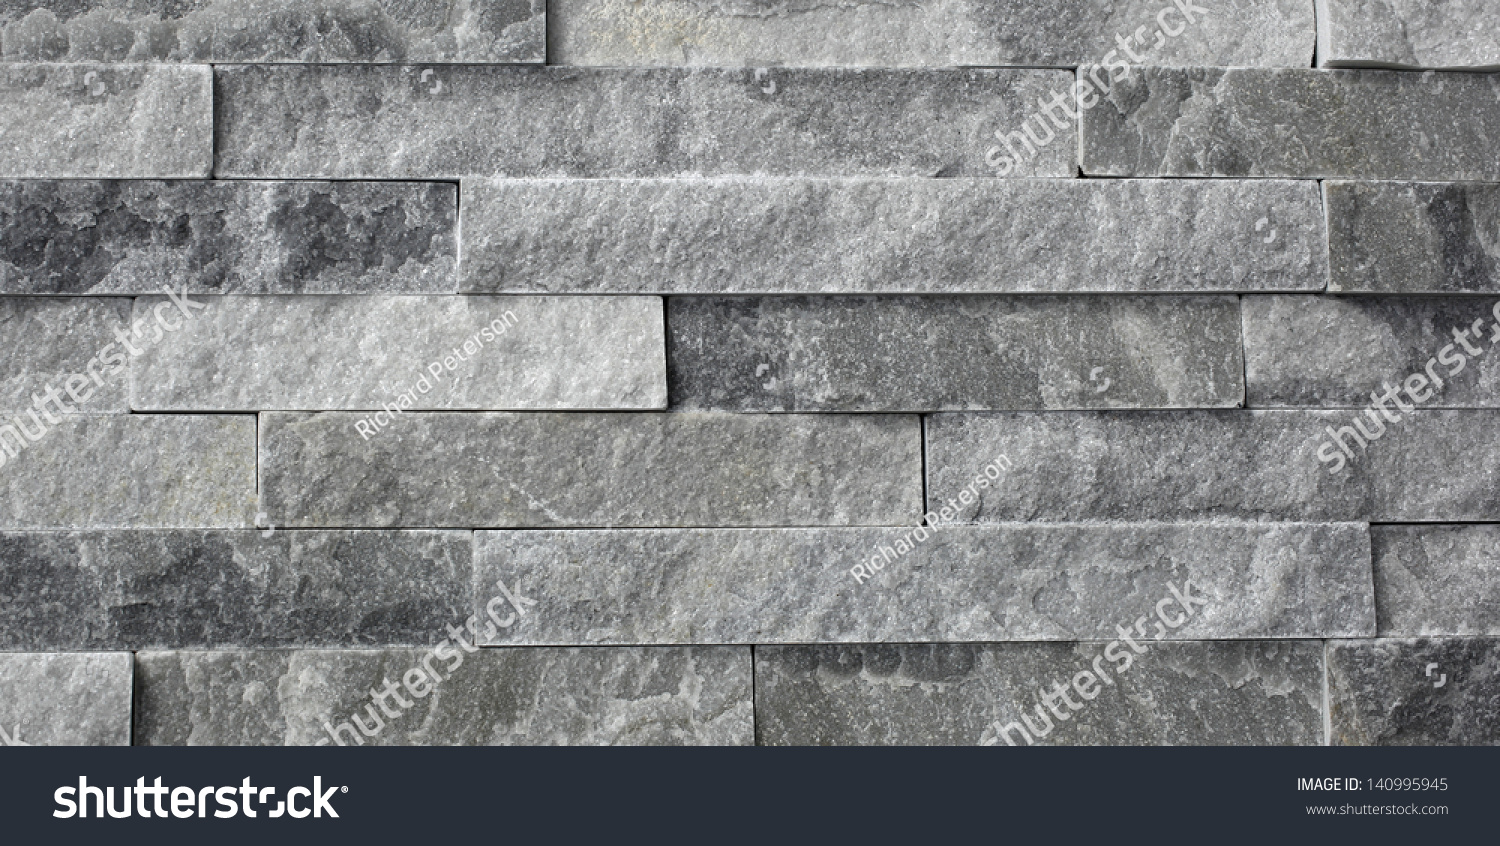 Natural Stone Granite Pieces Tiles For Walls Stock Photo 140995945 ...